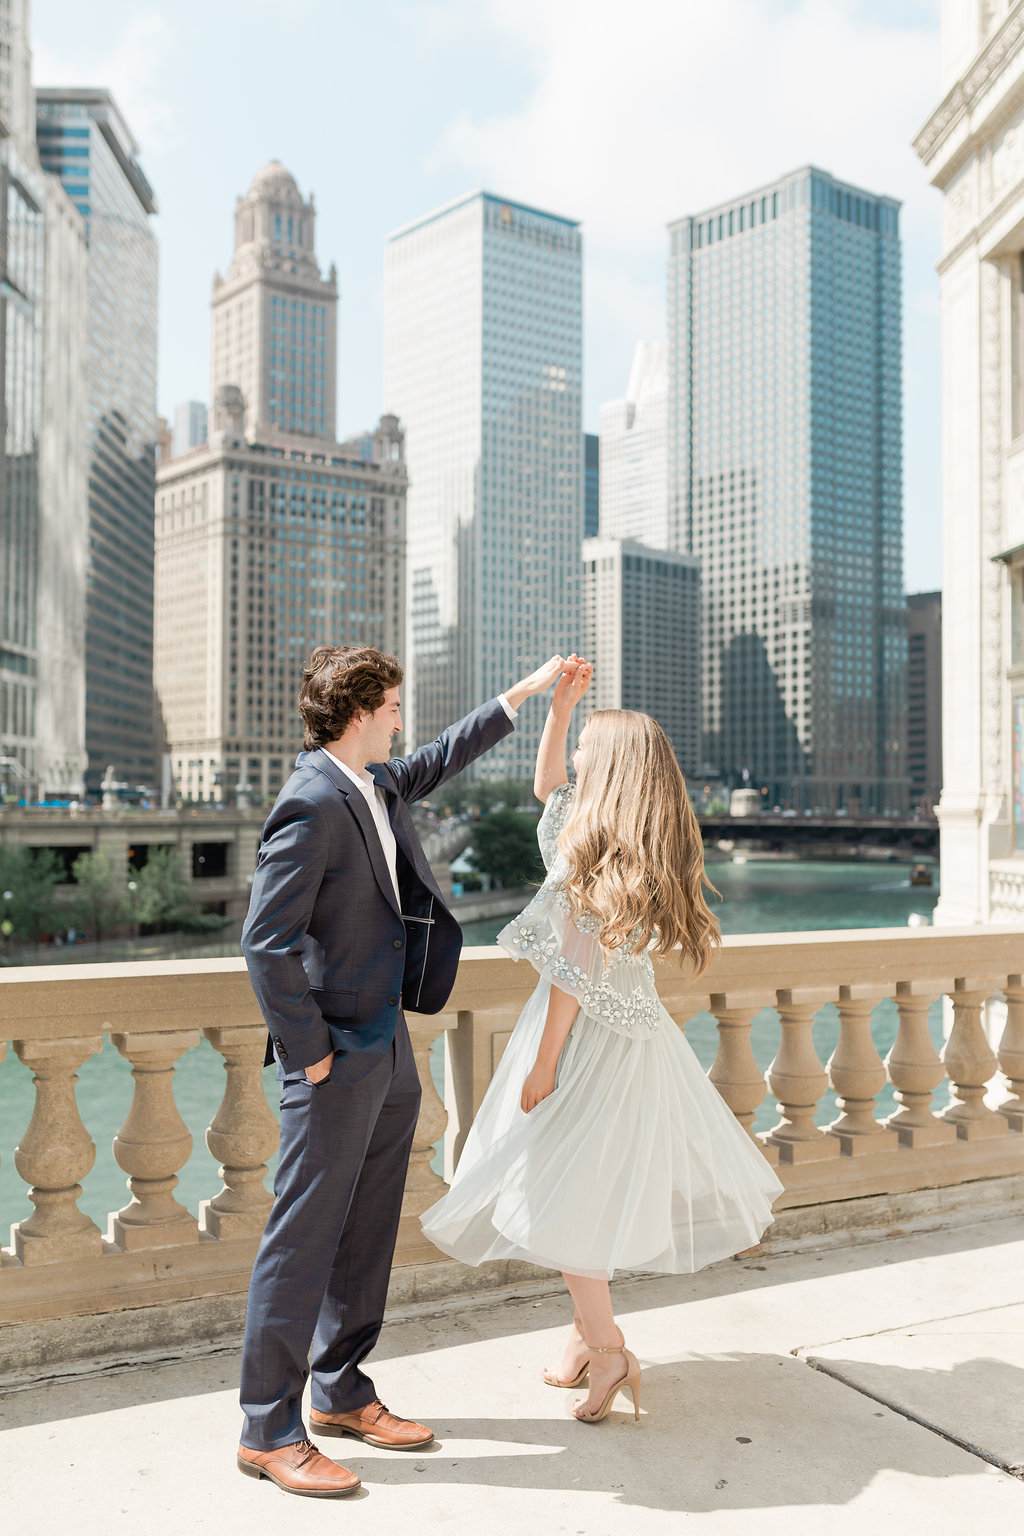 Twirling in Chicago | Miss Madeline Rose